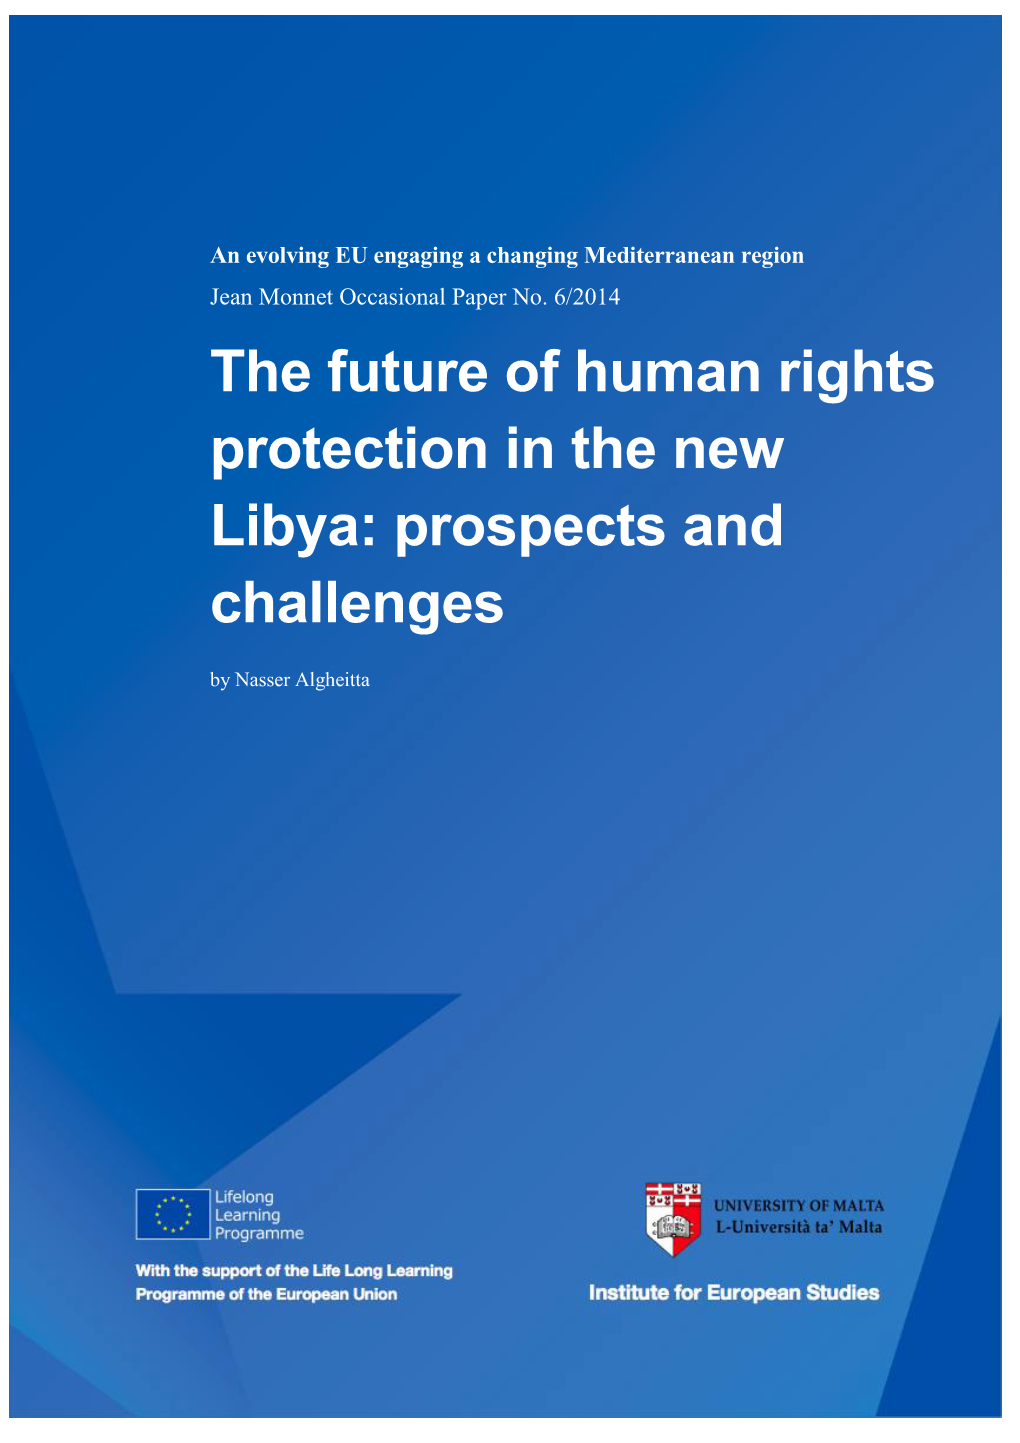 The Future of Human Rights Protection in the New Libya: Prospects and Challenges by Nasser Algheitta